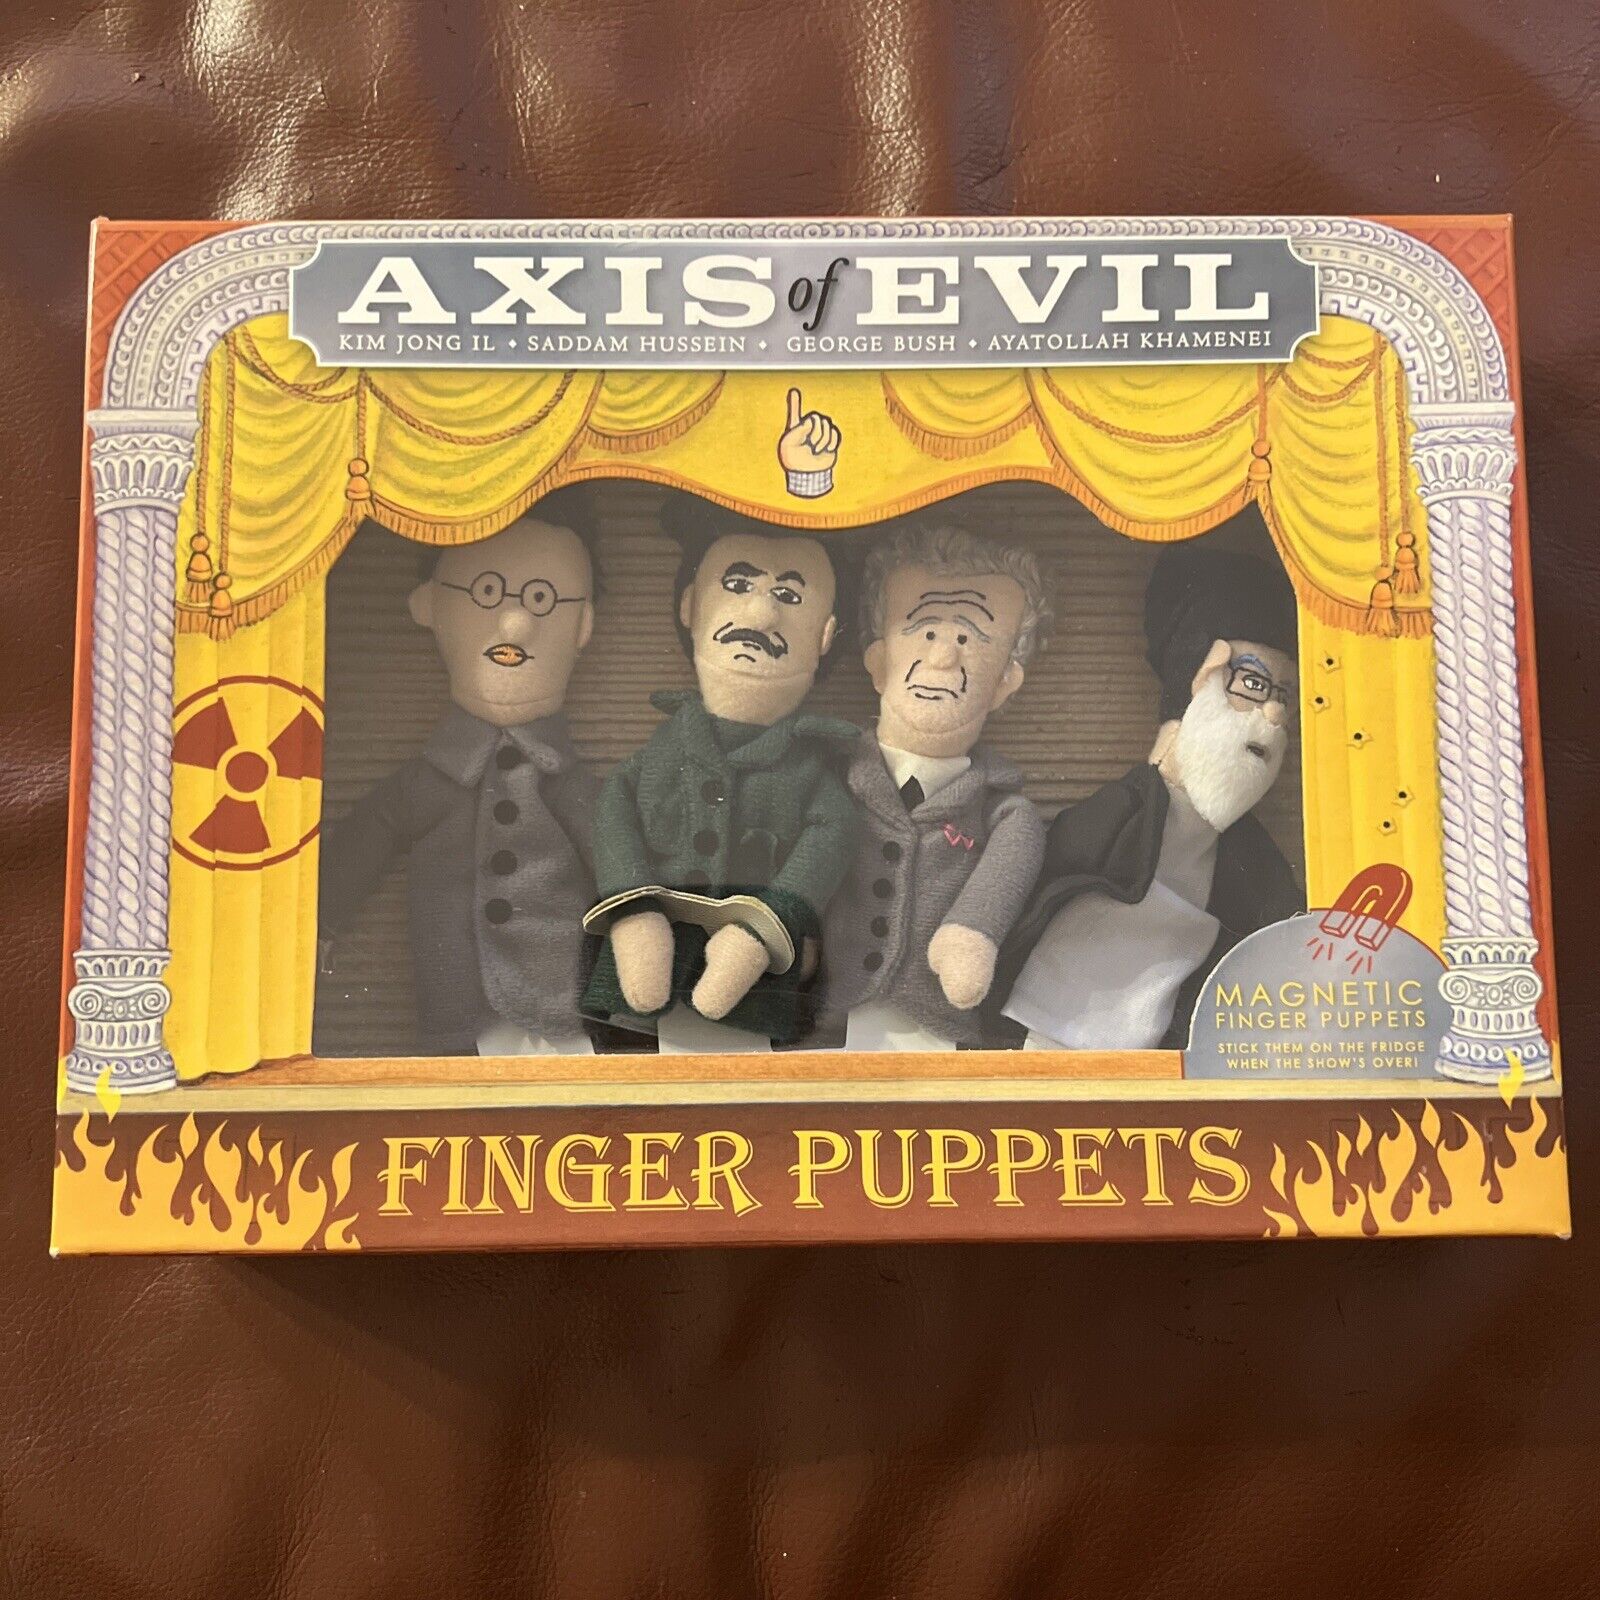 NEW Axis of Evil Magnetic Finger Puppets George Bush Saddam Hussein Kim Jong Il